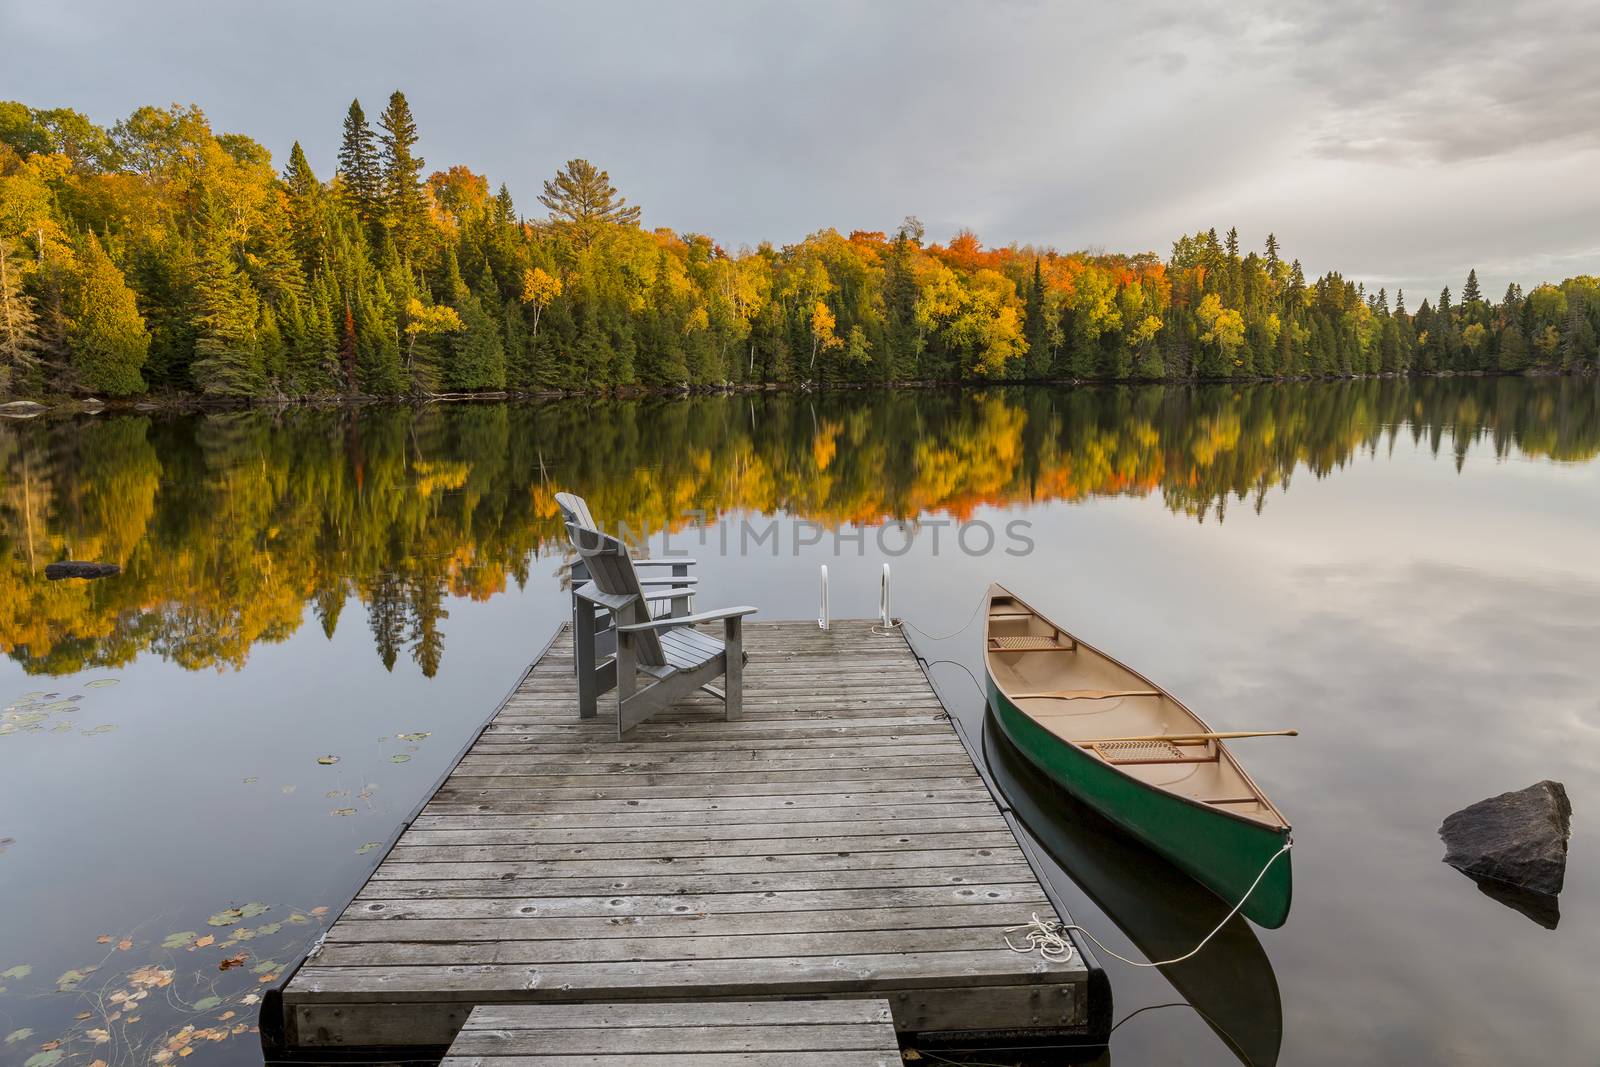 Canoe and Dock on an Autumn Lake - Ontario, Canada by gonepaddling